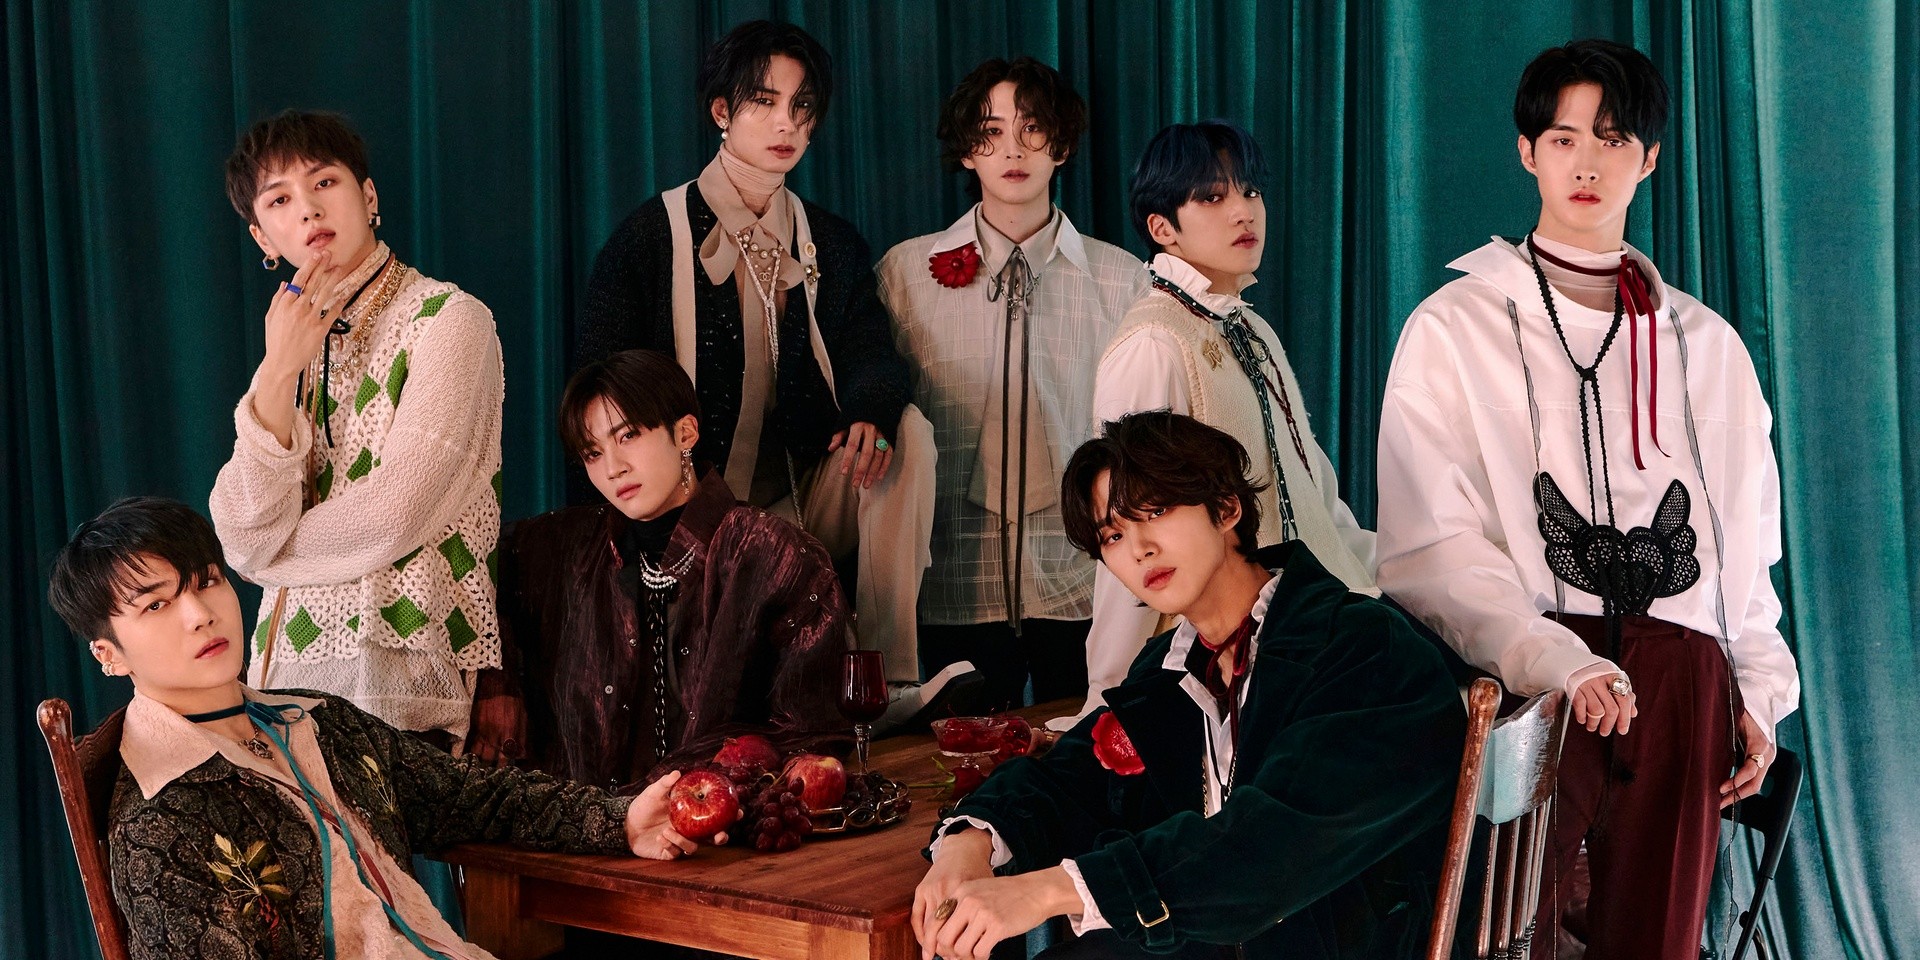 PENTAGON on the challenges and inspirations that shaped their latest album 'IN:VITE U'